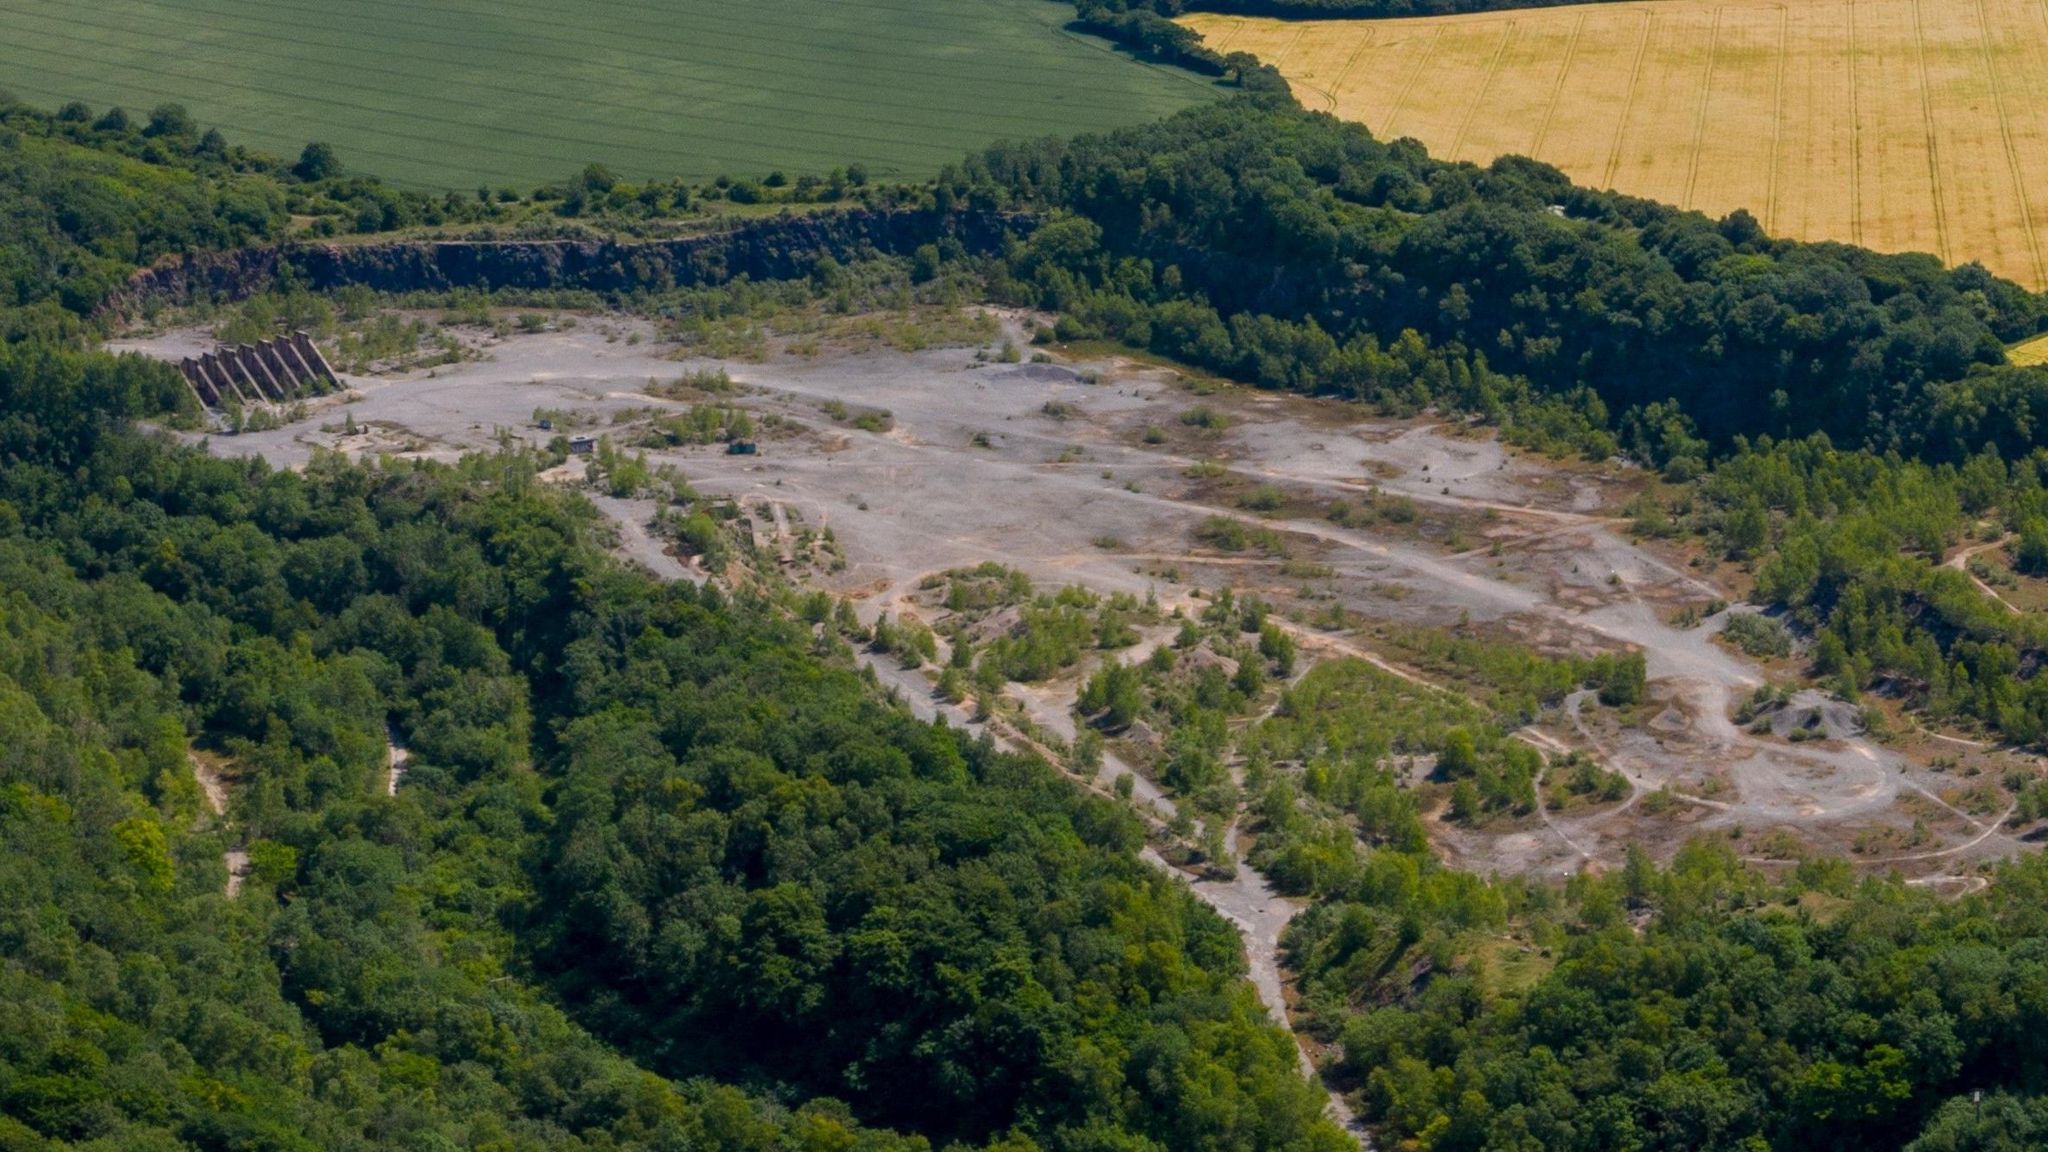 An aerial image of Westdown Quarry. It is a large dug out space surrounded by green fields and thick woodland